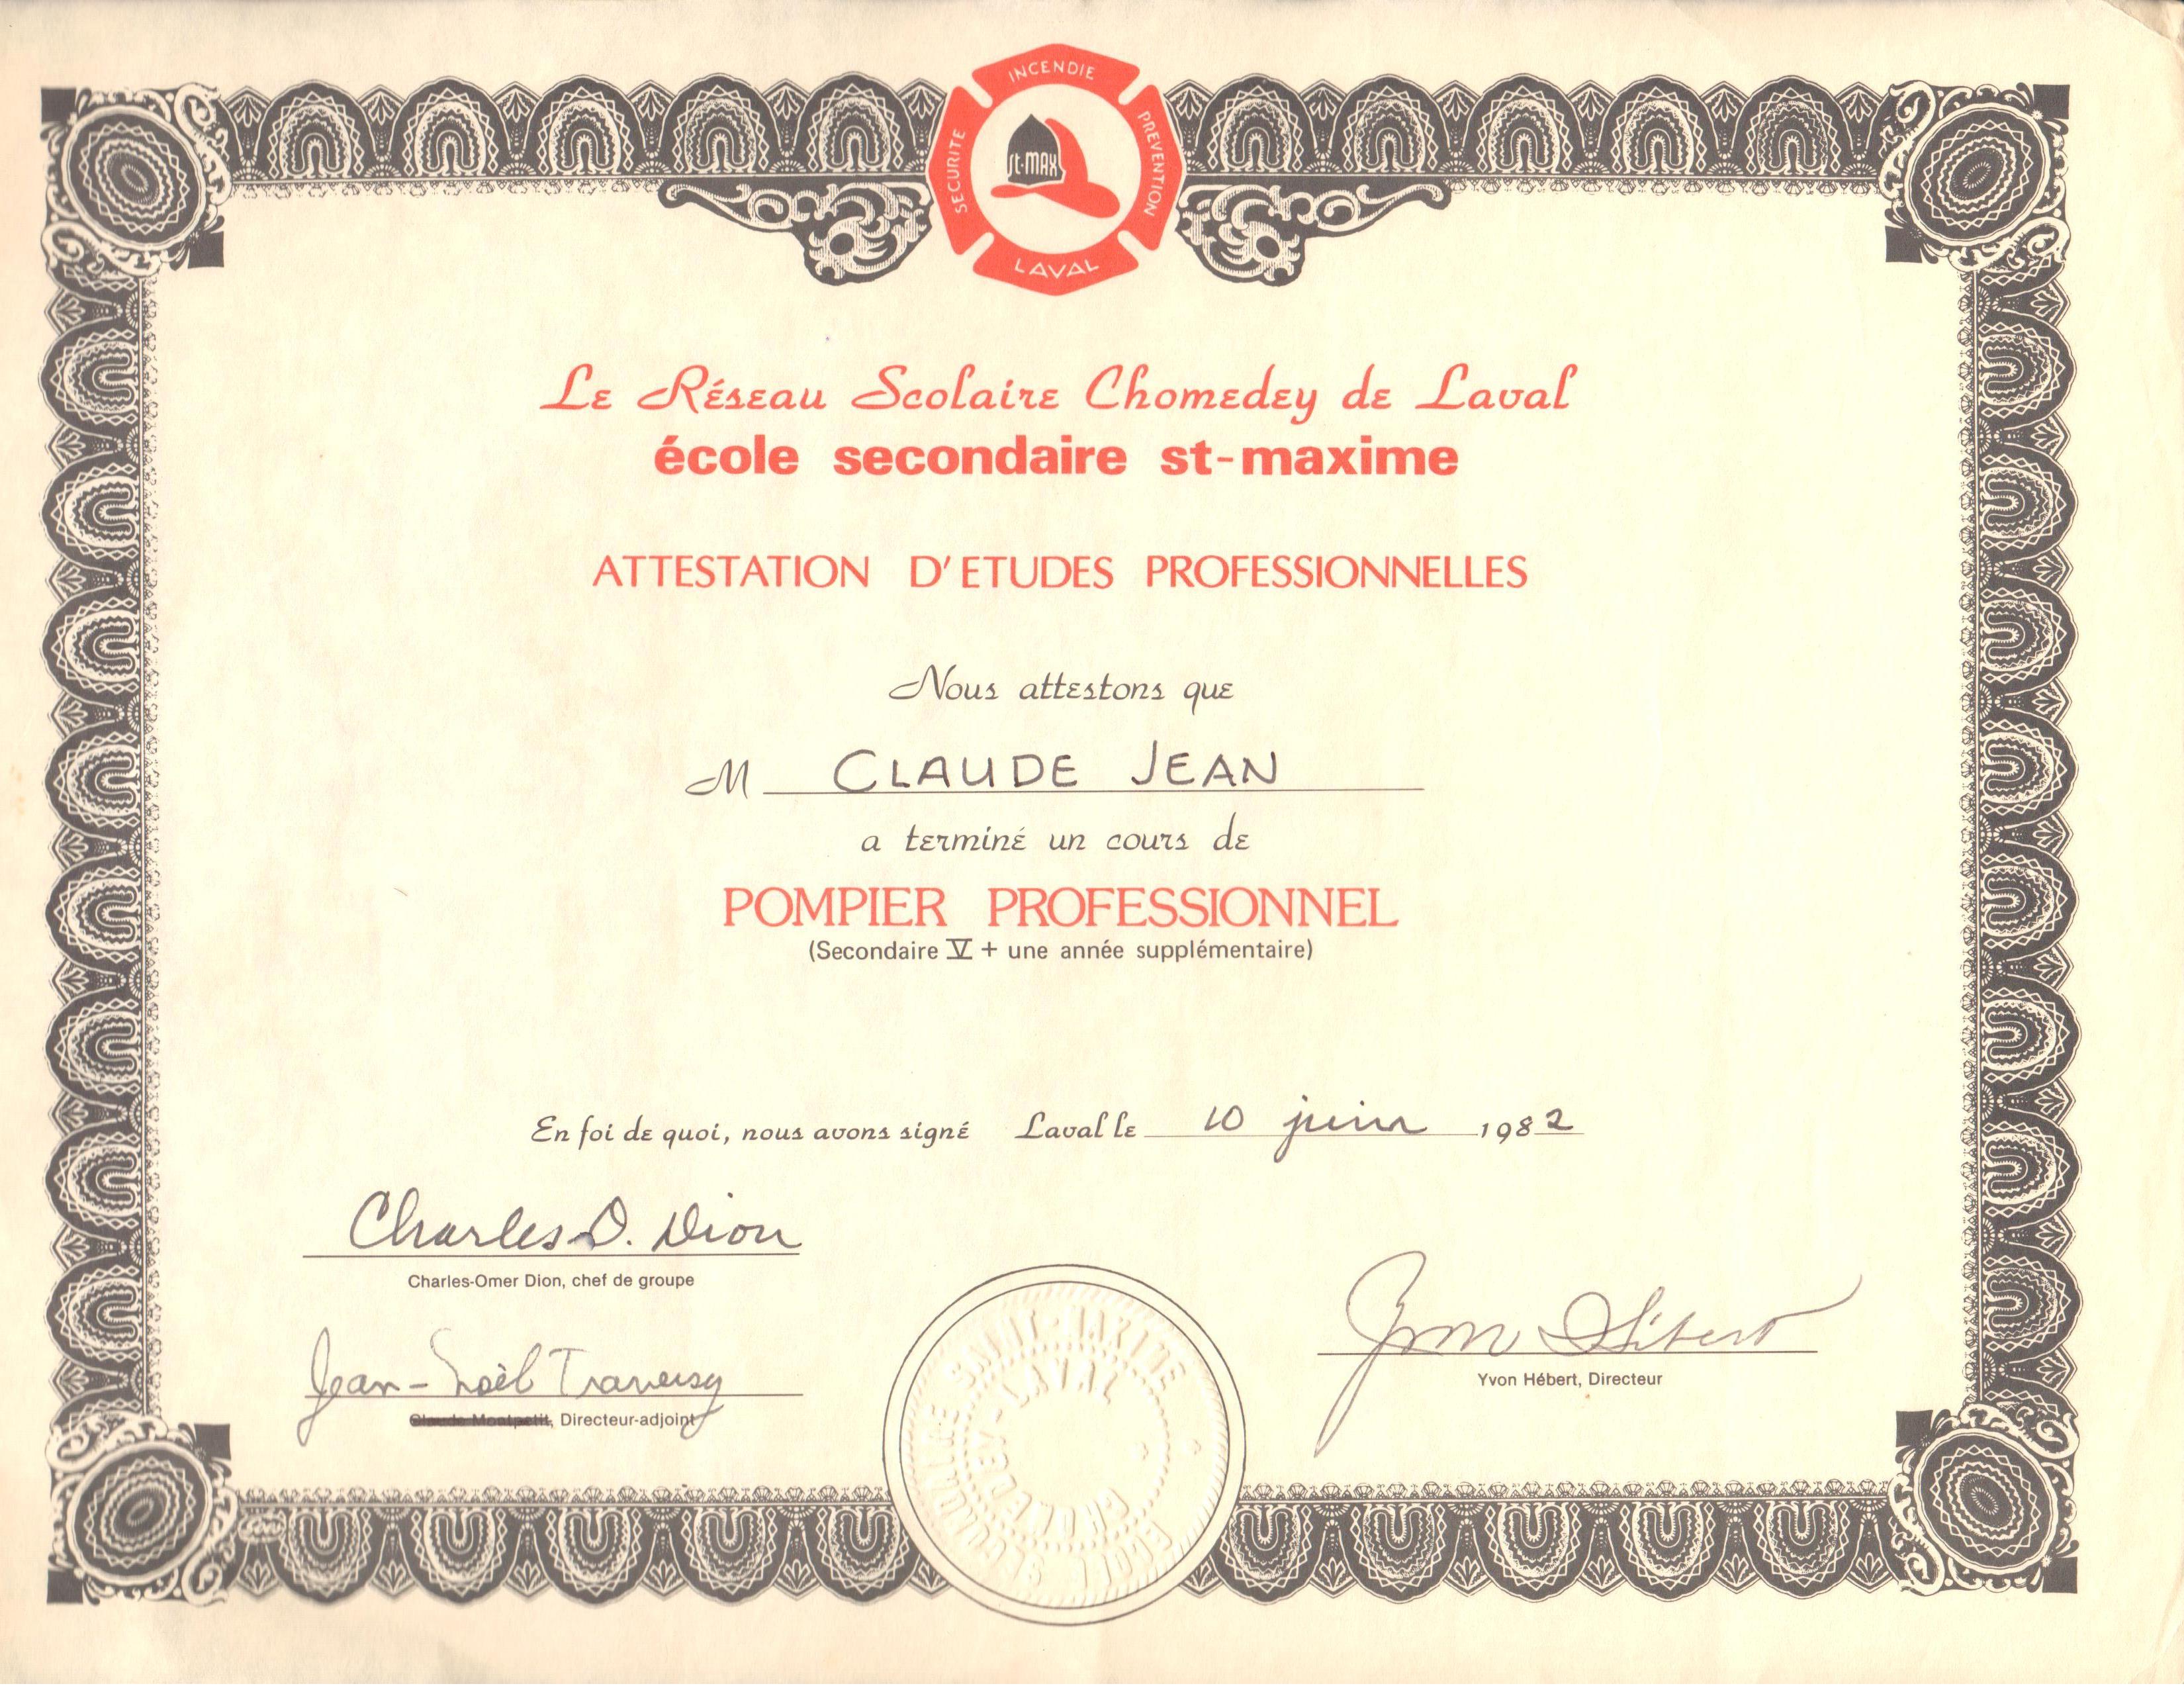 Colour photograph of a yellowing sheet of paper with a brown border, certifying the completion of the firefighting course at Saint-Maxime Secondary School